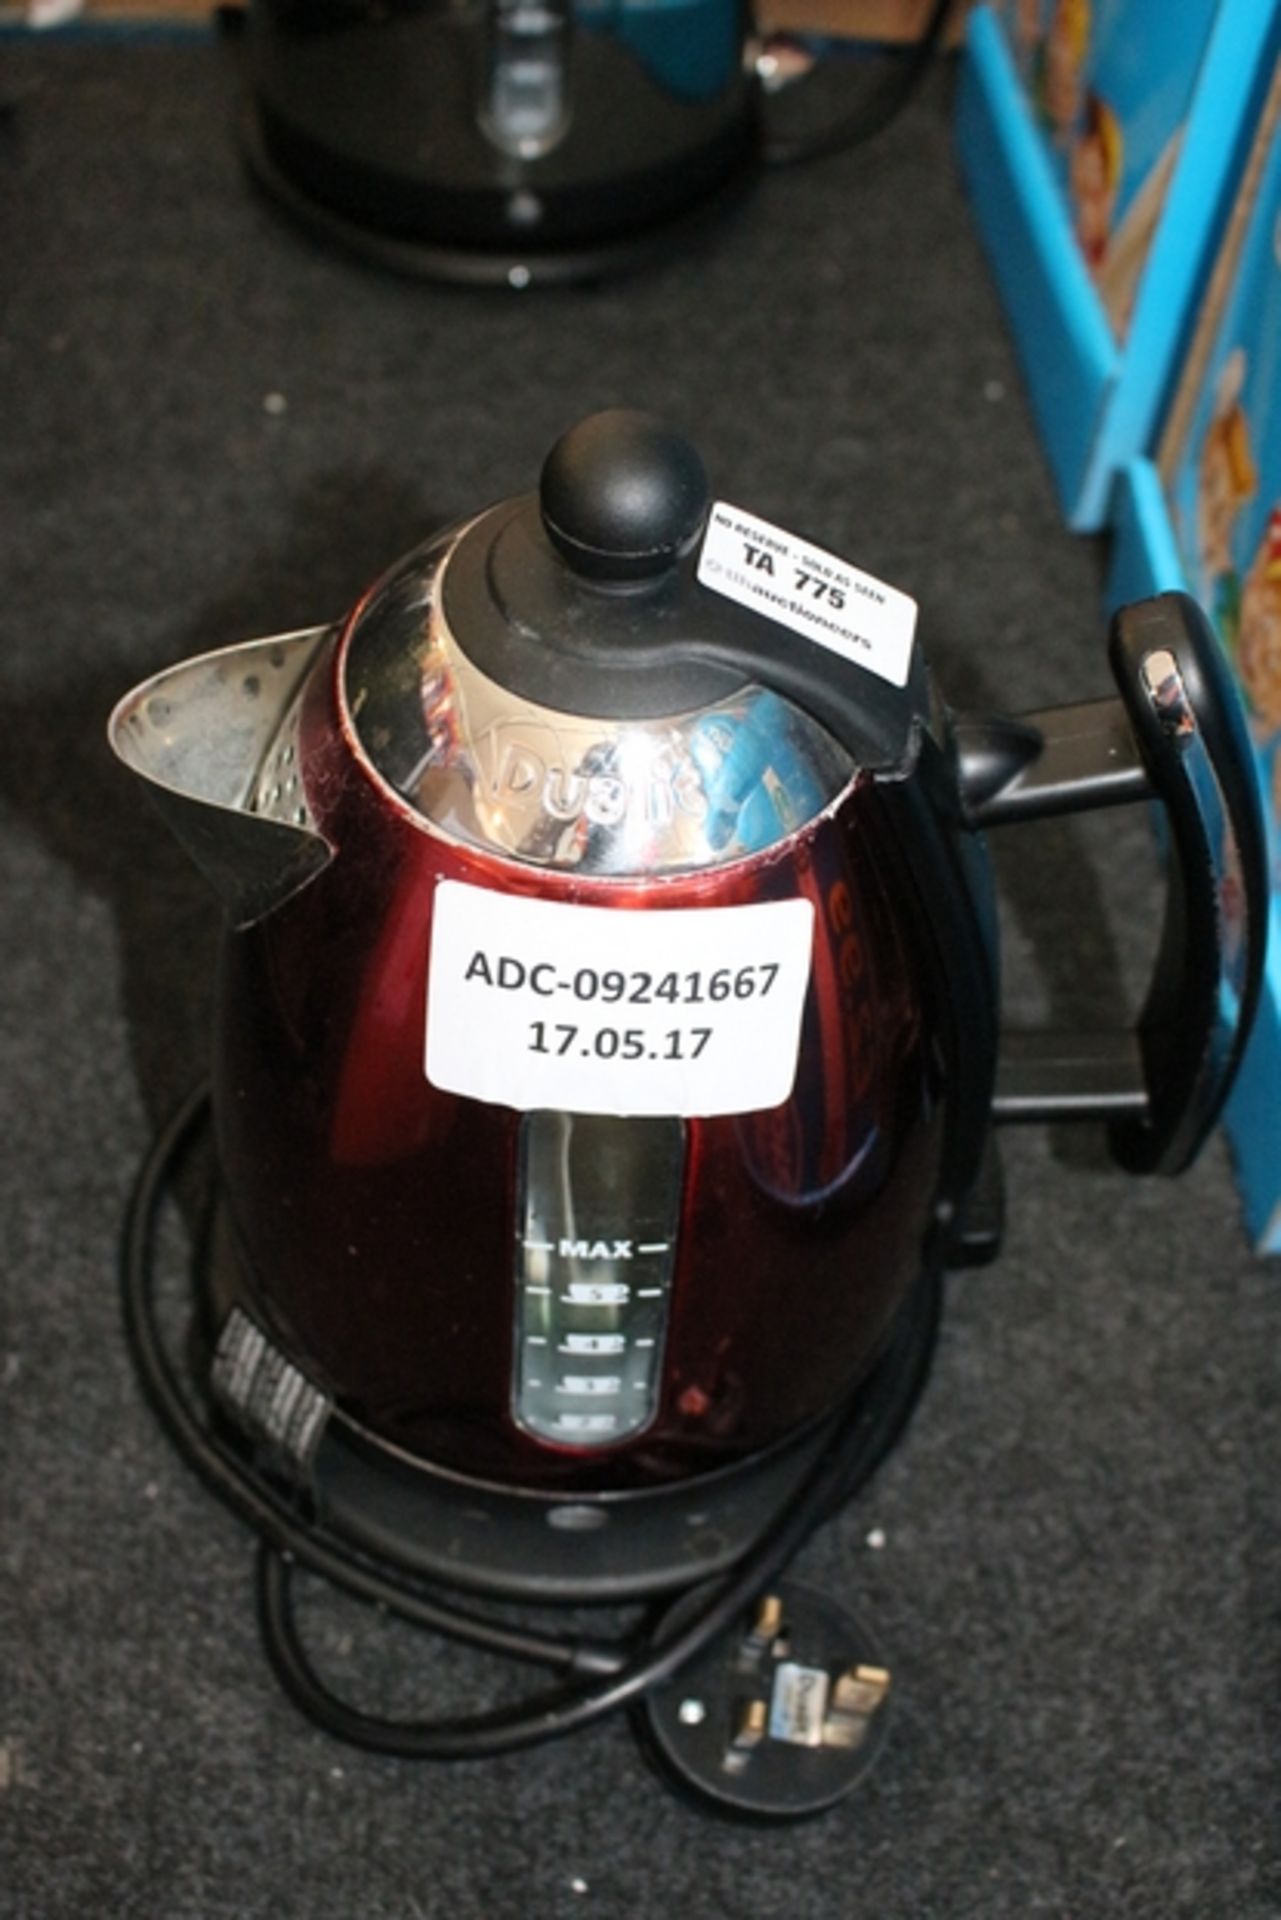 1X DUALIT JUG KETTLE RRP £60 (ADC-09241667) (17/05/17)